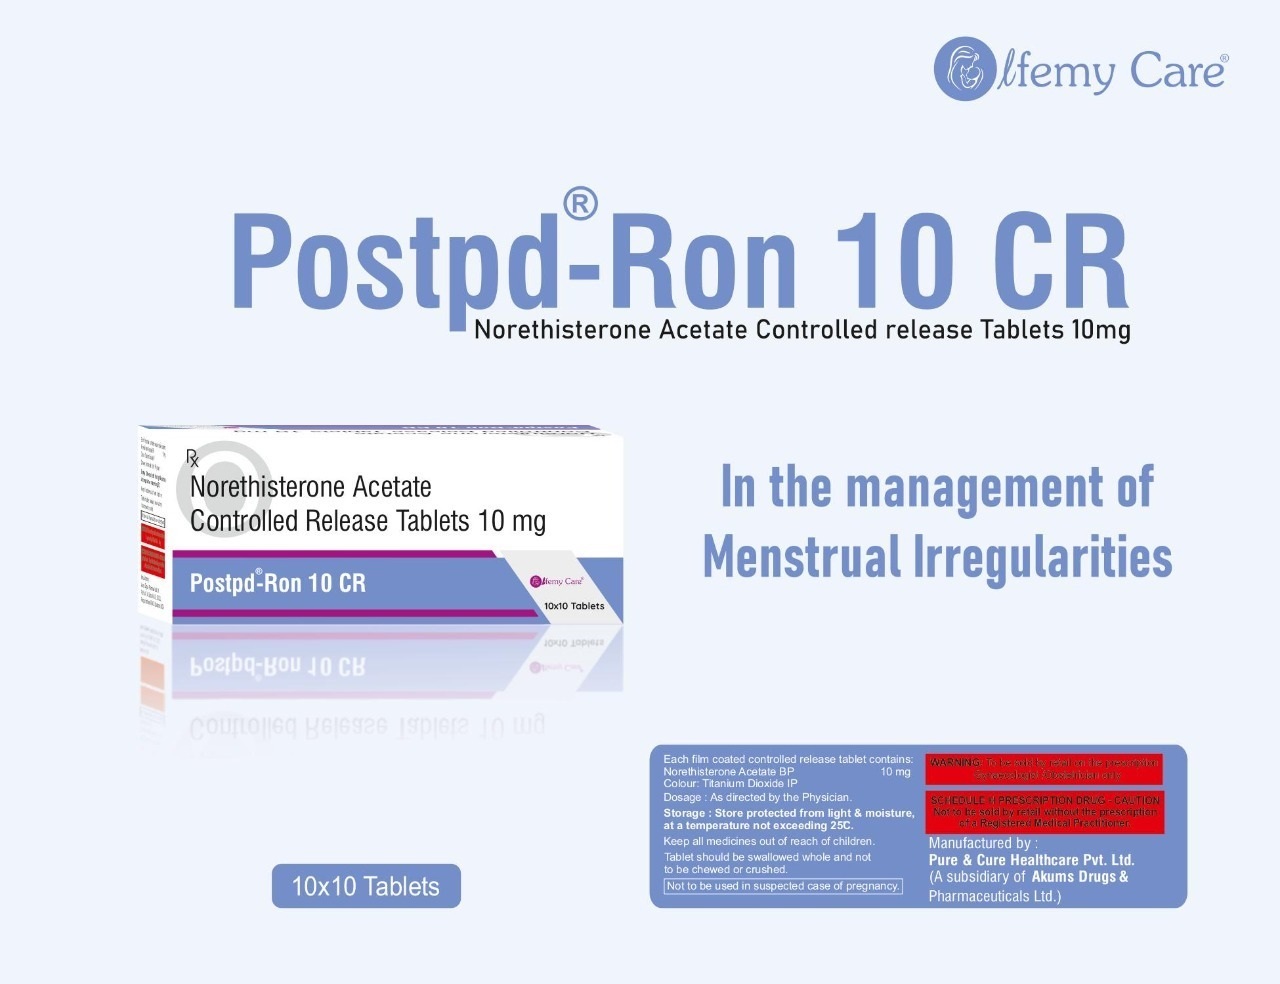 Product Name: Postpd Ron 10 CR, Compositions of Postpd Ron 10 CR are Norethisterone Acetate Controlled Release Tablets 10 mg - Olfemy Care